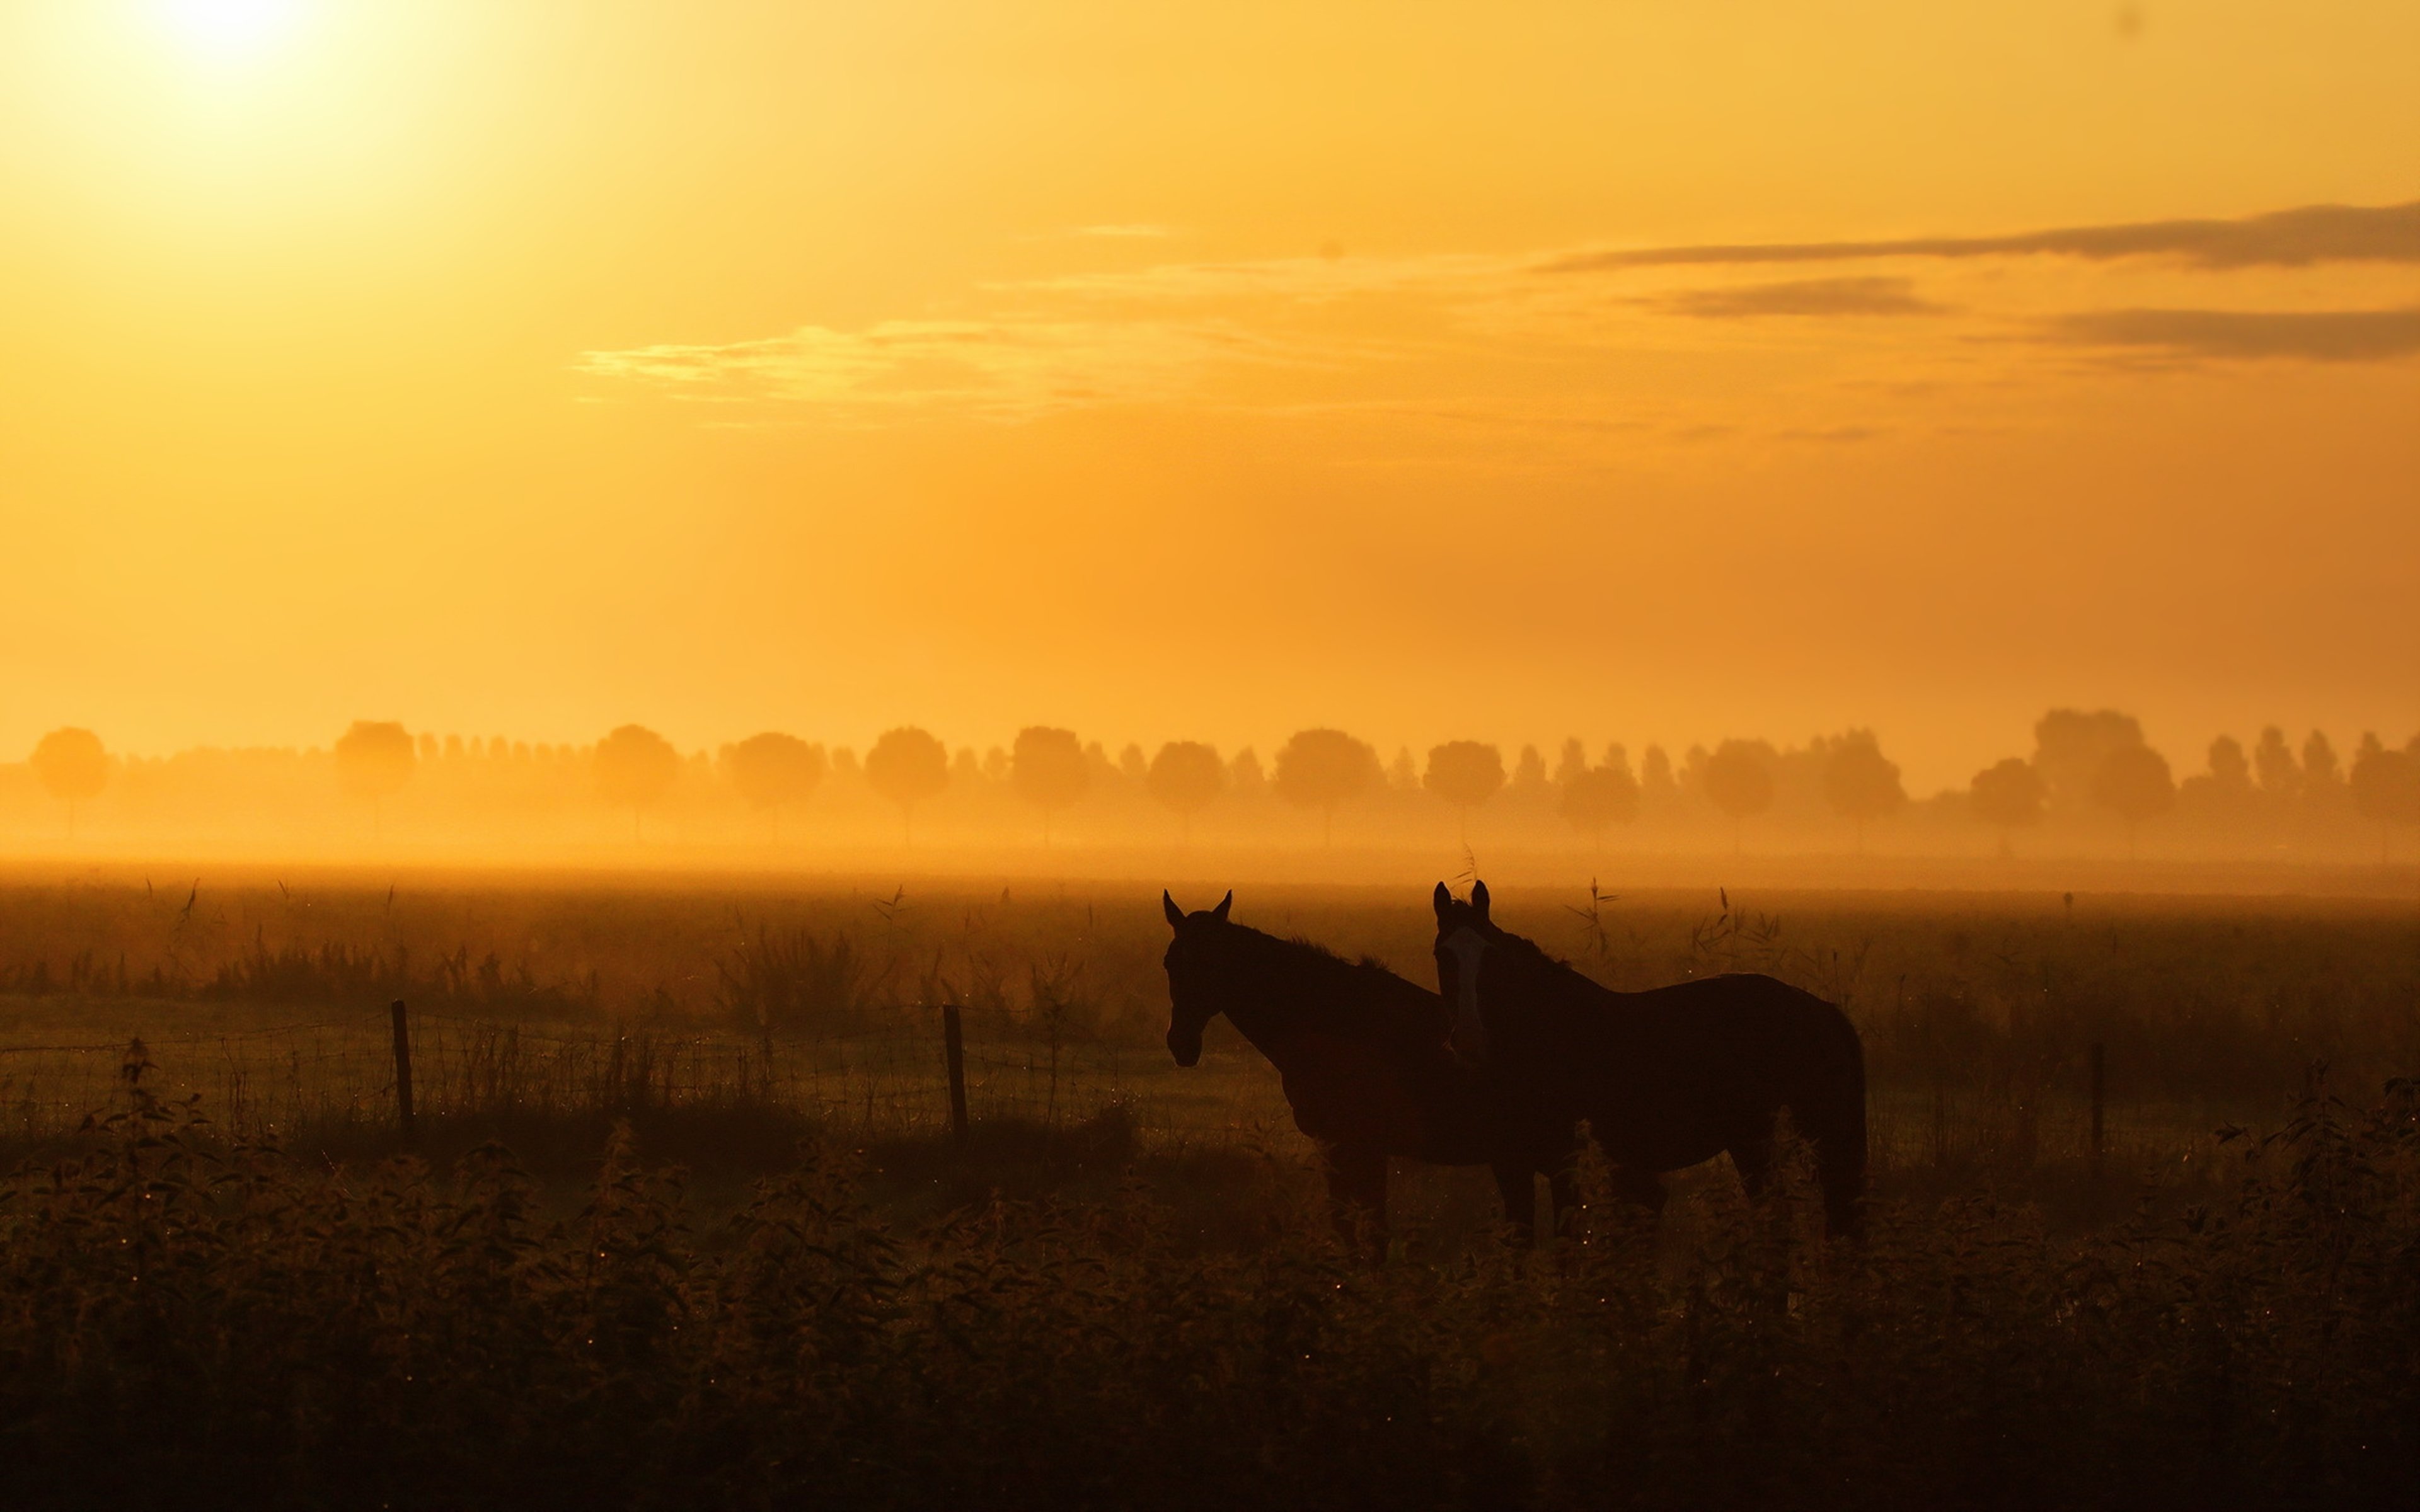 horses, Animals, Farms, Nature, Landscapes, Earth, Summer, Trees, Countryside, Fields, Sunset, Orange, Sky, Clouds Wallpaper